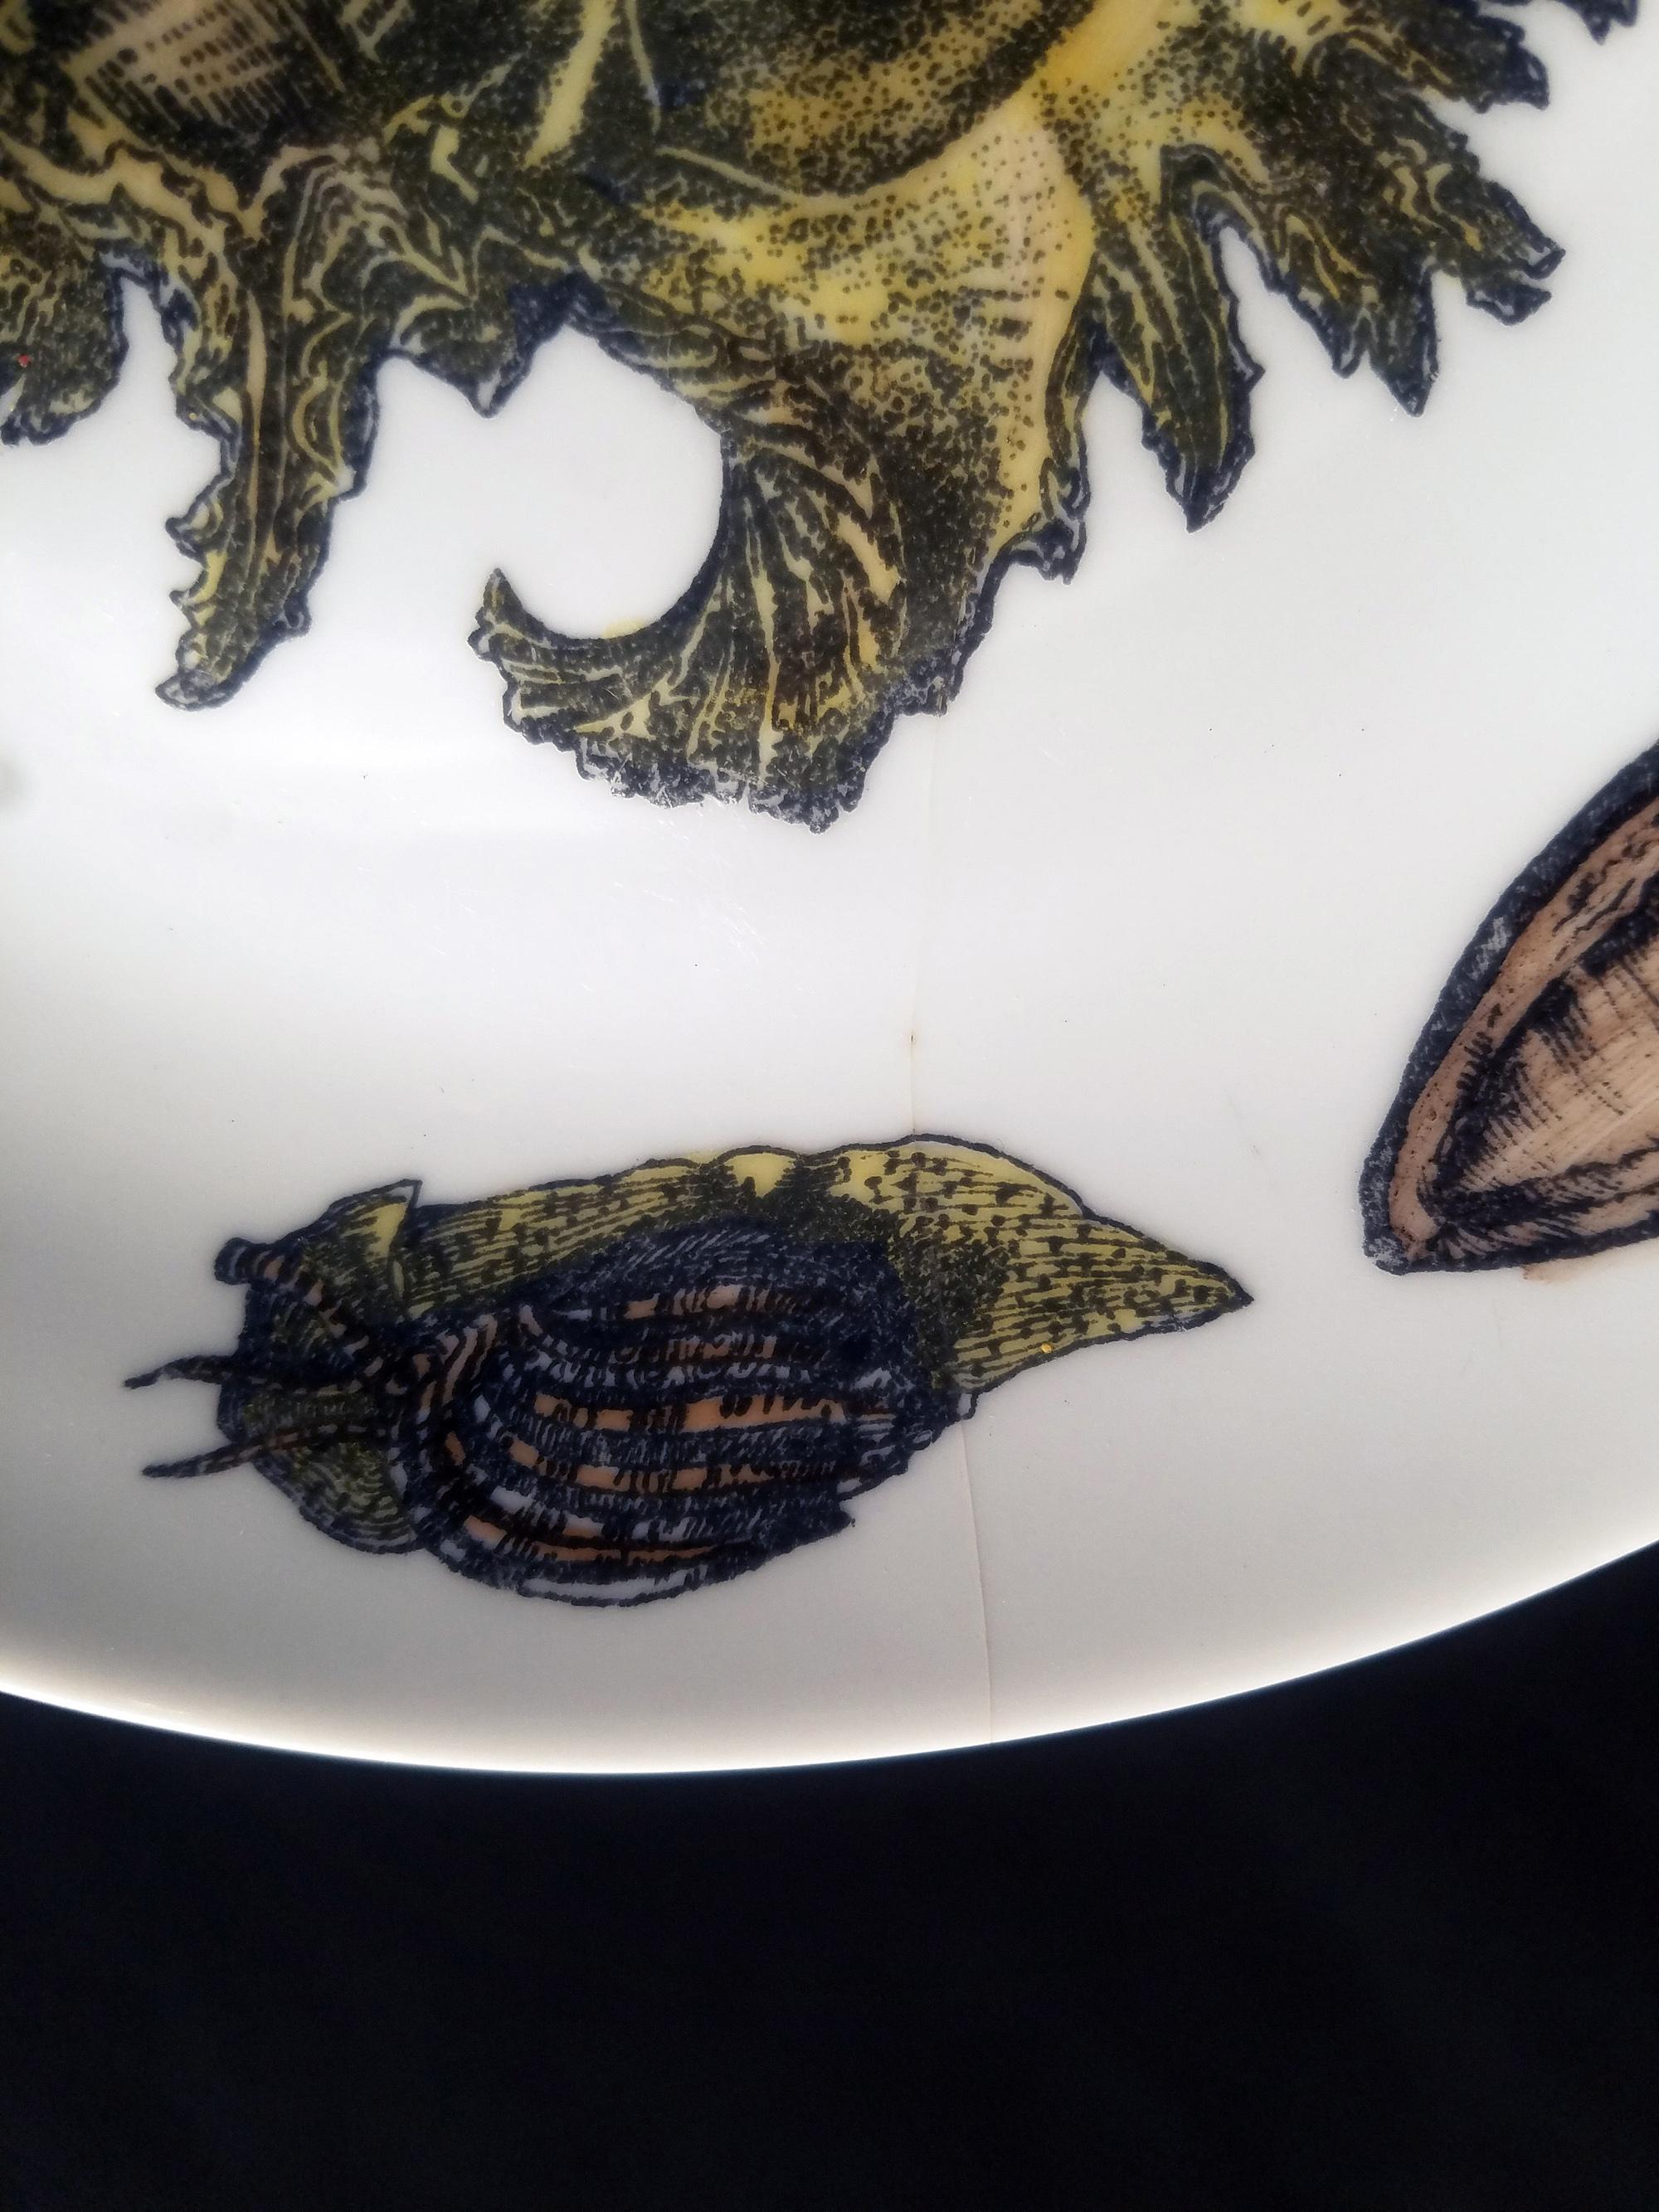 Piero Fornasetti Porcelain Conchiglie Seashell Set of Plates with Mollusks For Sale 13